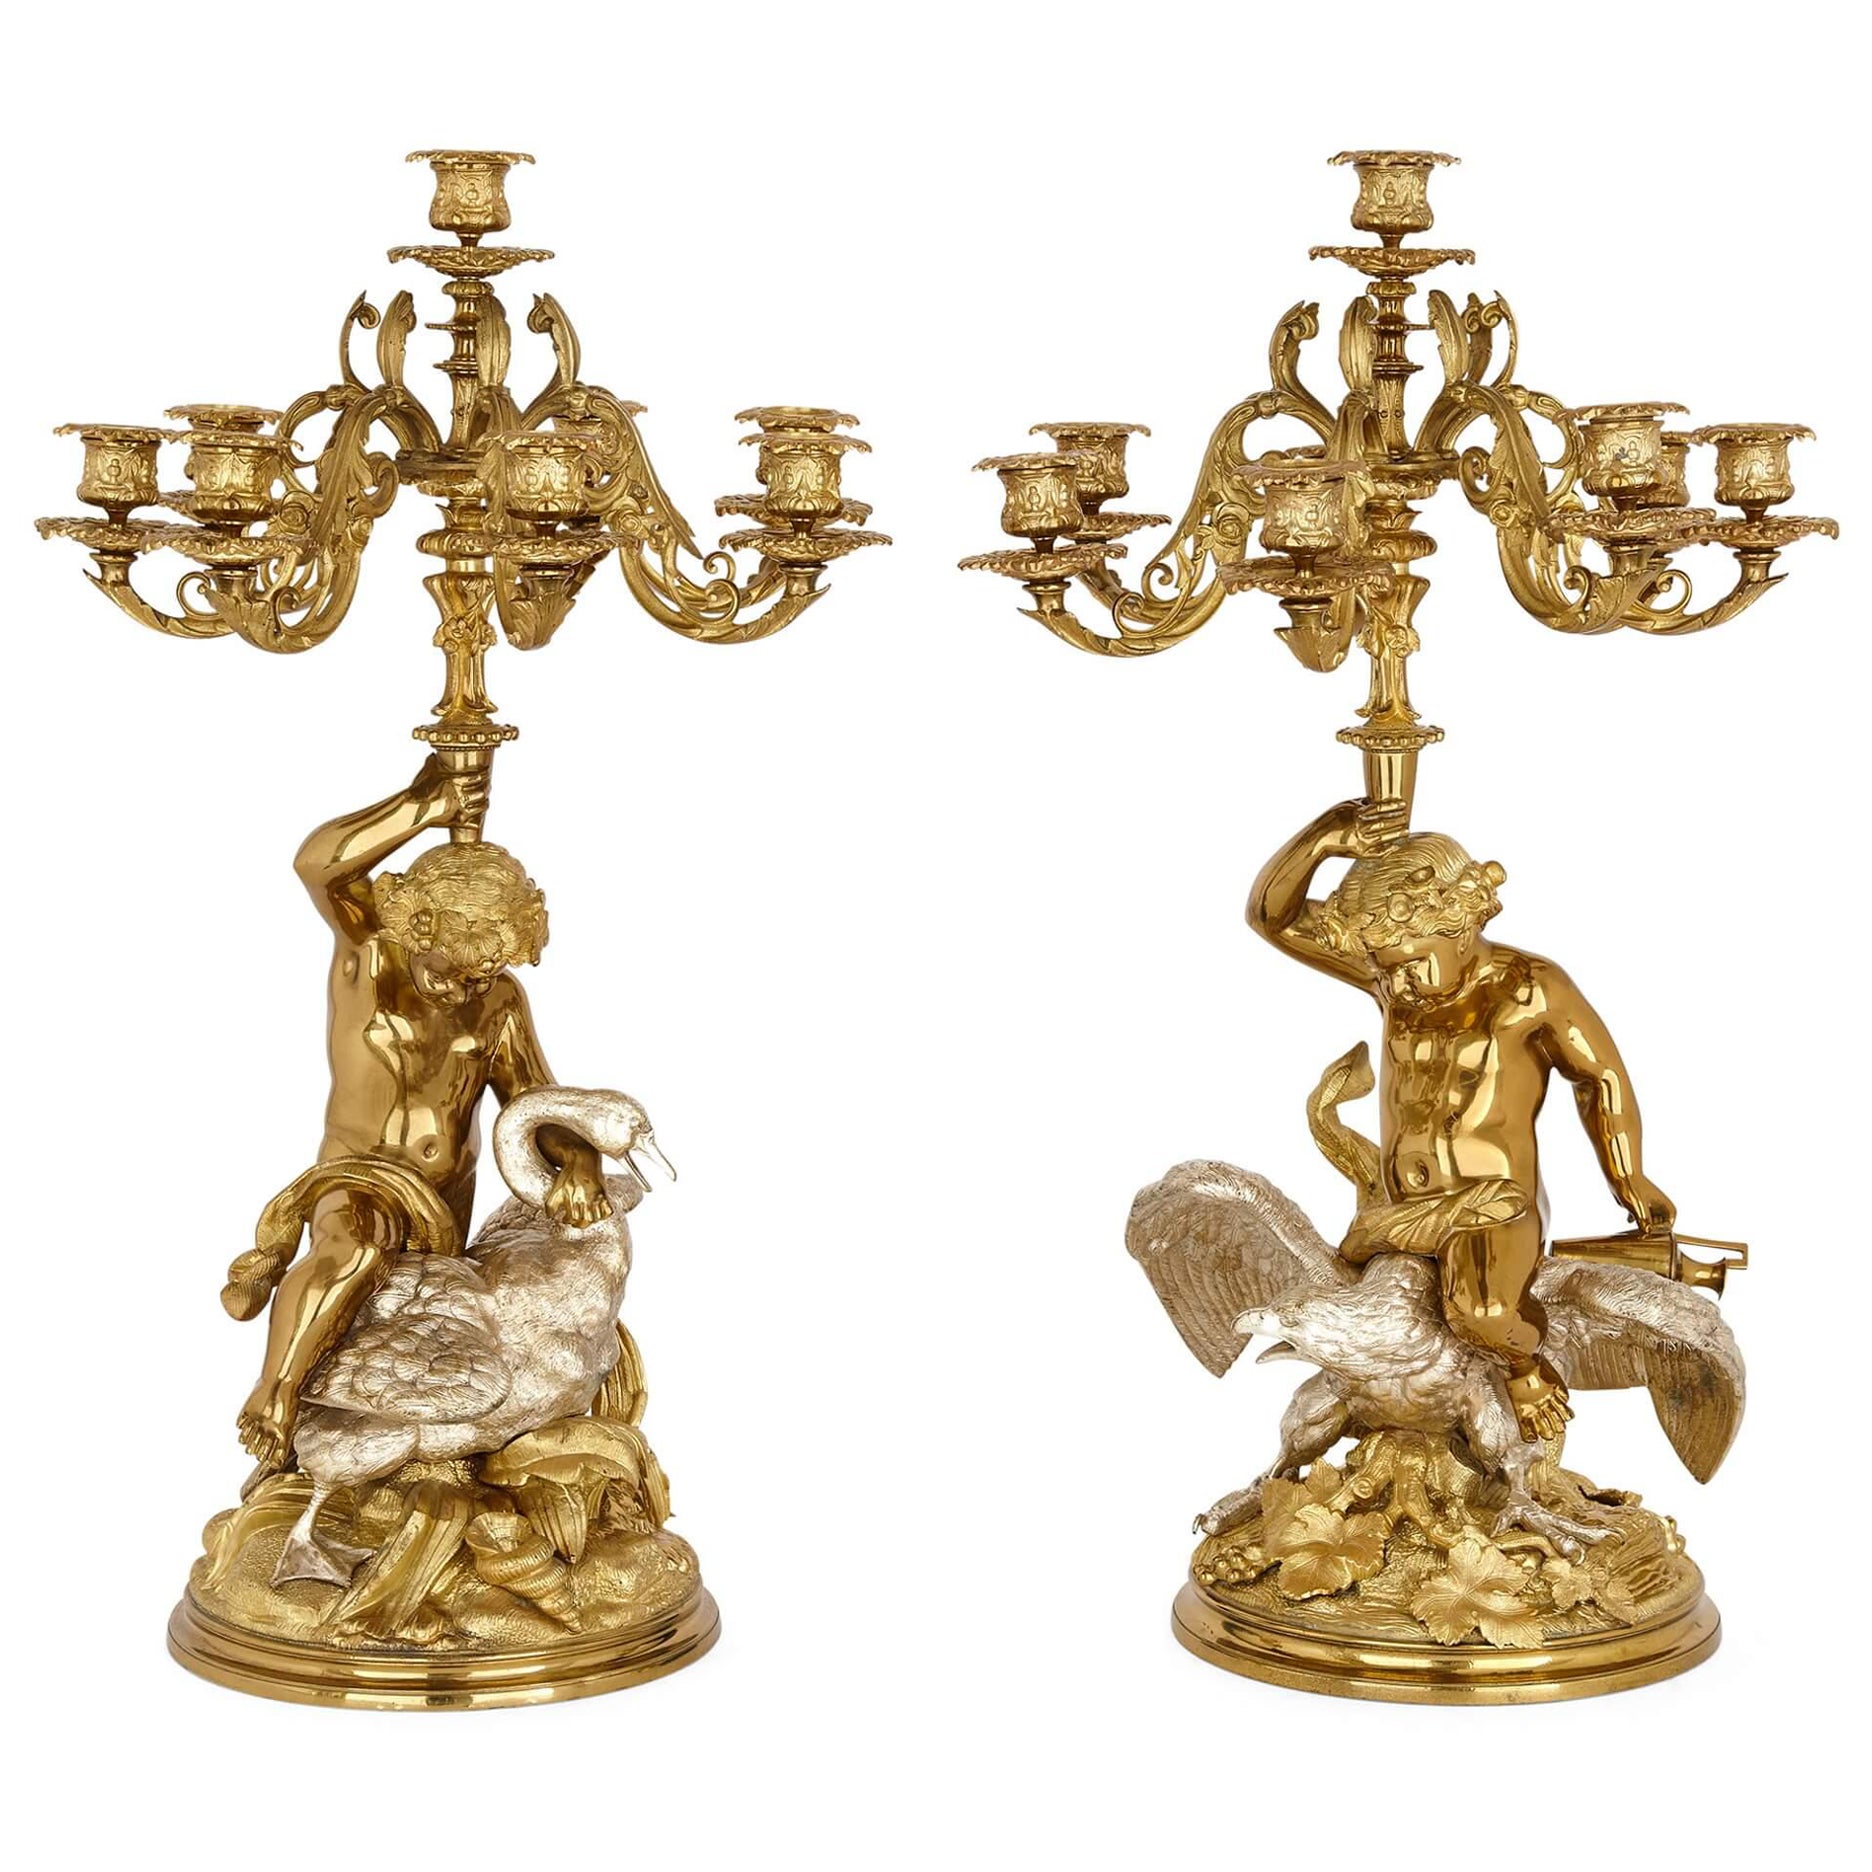 Pair of French Silvered and Gilt Bronze Candelabra 